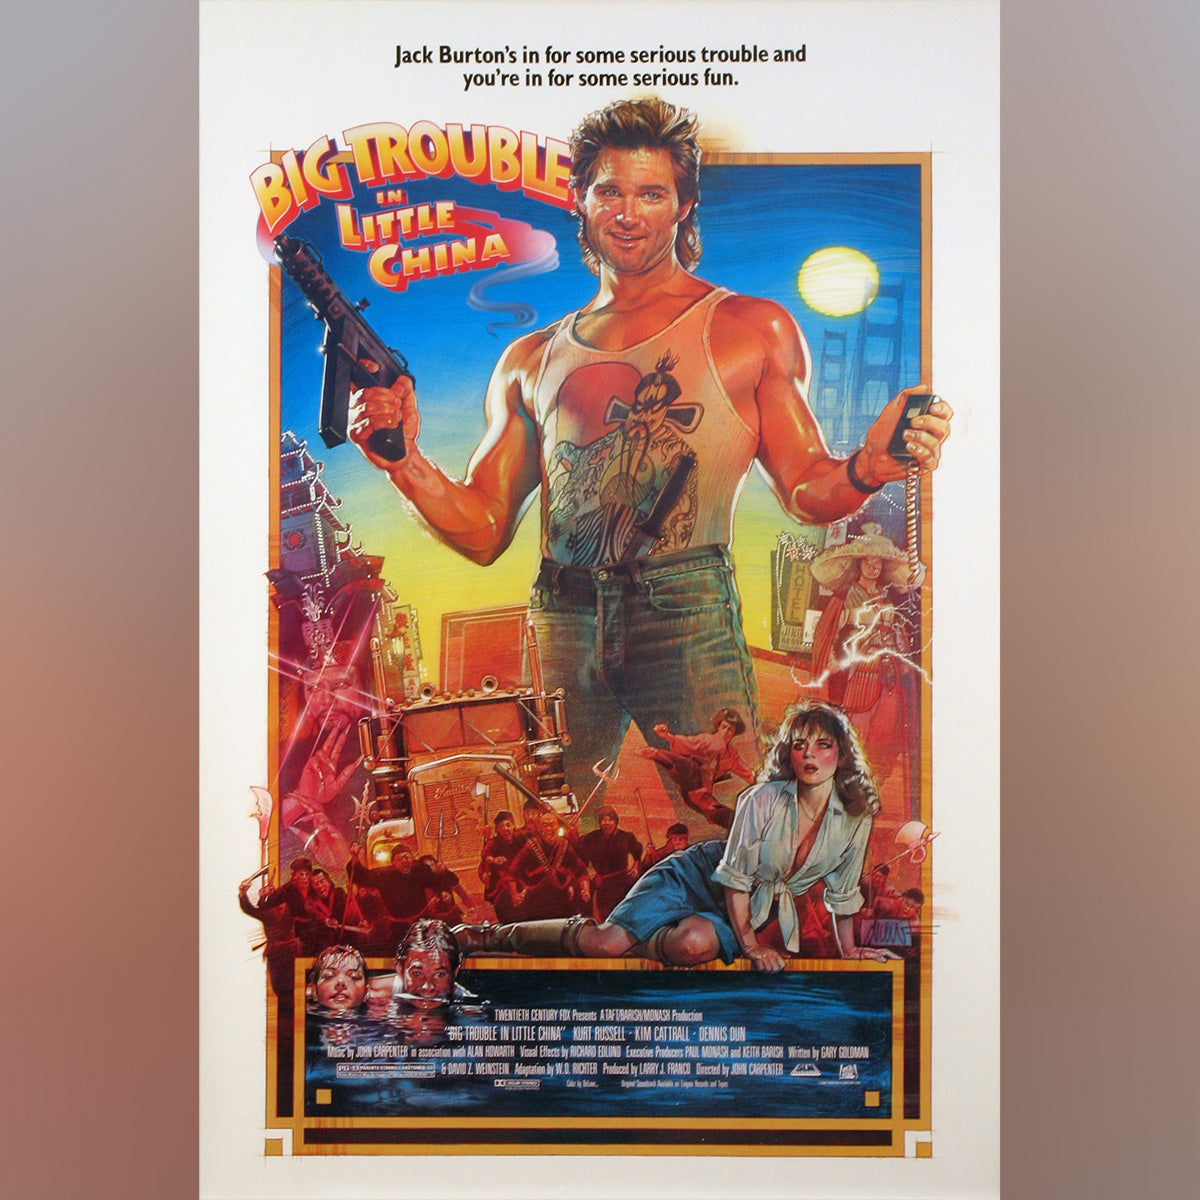 Original Movie Poster of Big Trouble In Little China (1986)